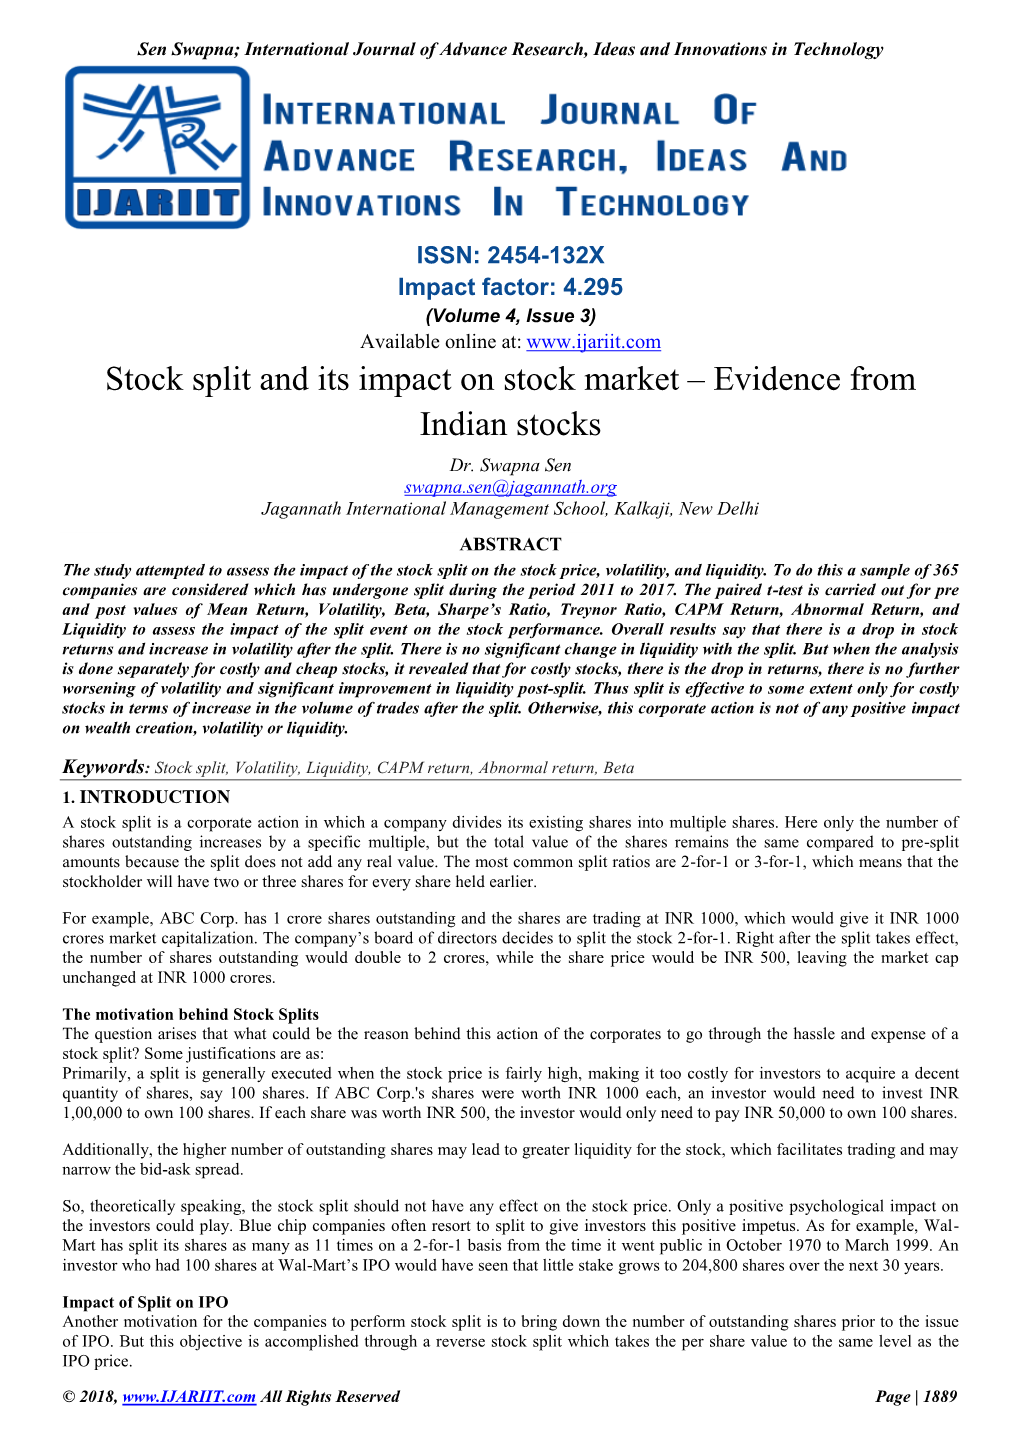 Stock Split and Its Impact on Stock Market – Evidence from Indian Stocks Dr